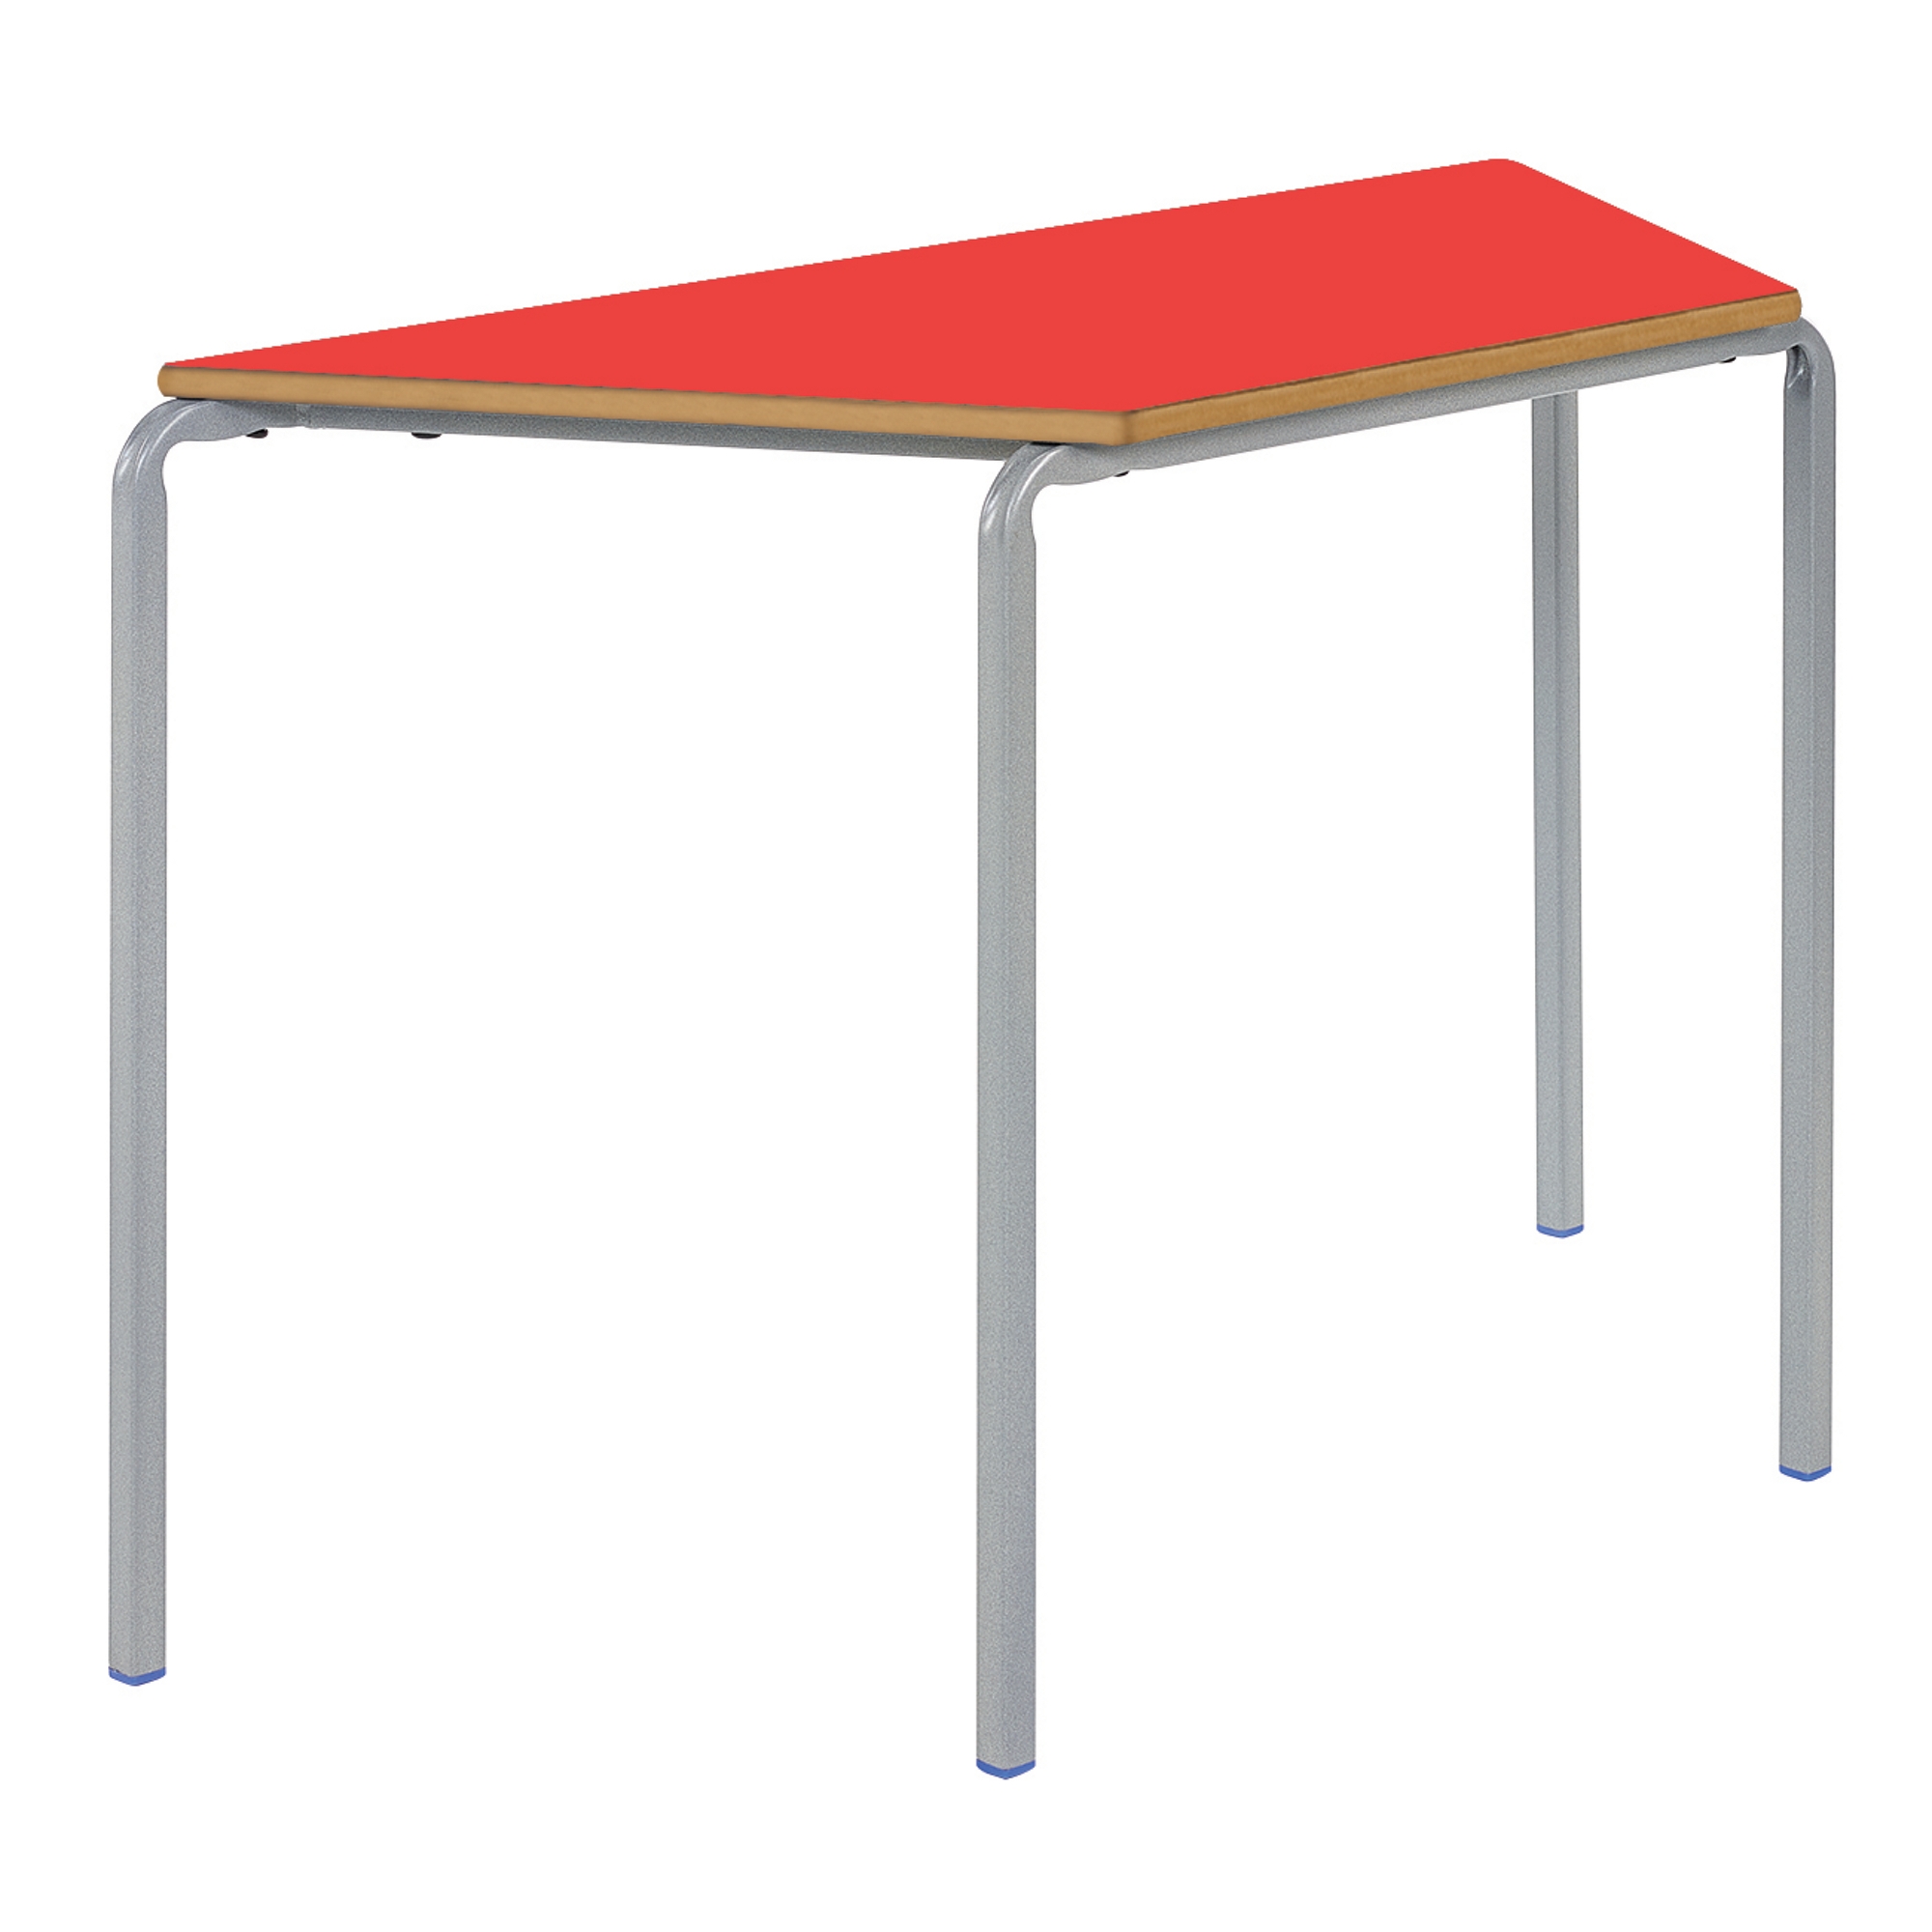 Classmates Trapezoidal Crushed Bent Classroom Table - 1100 x 550 x 460mm - Red